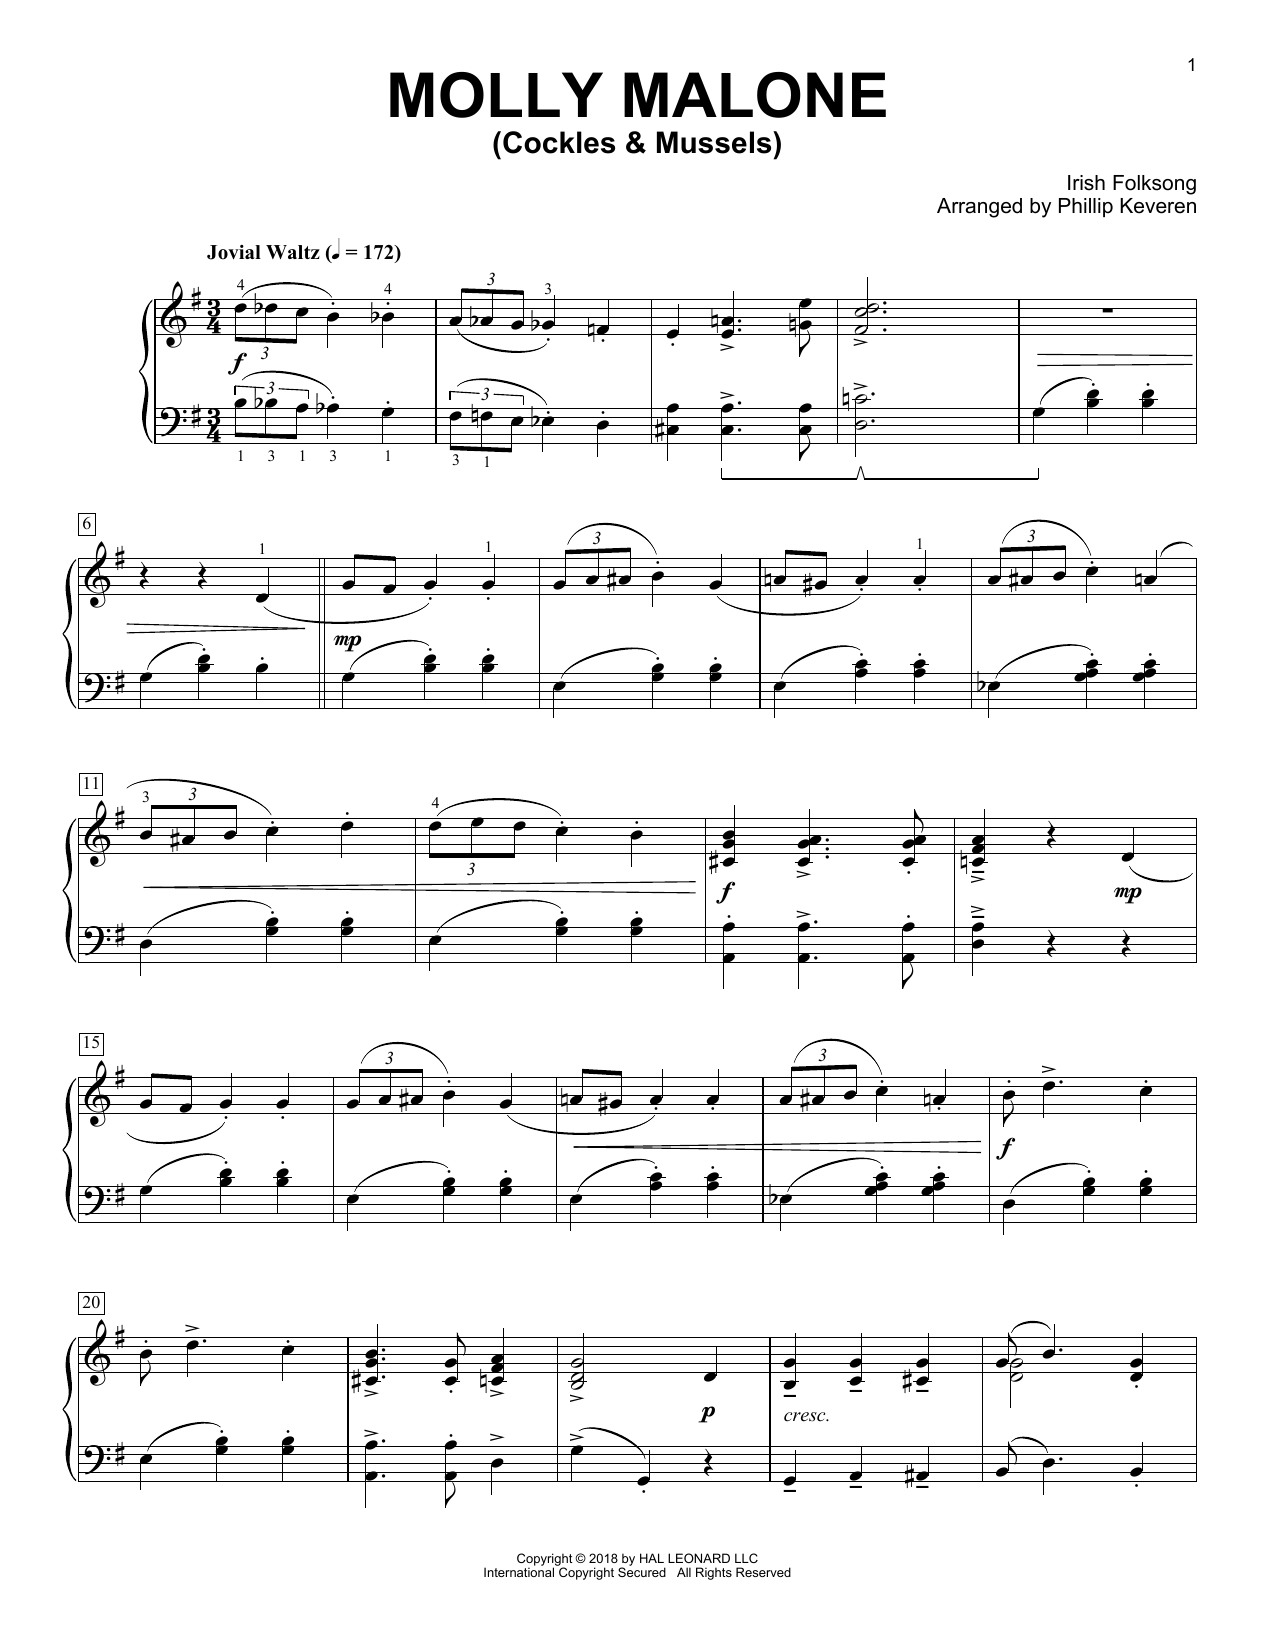 Download Irish Folksong Molly Malone (Cockles & Mussels) [Class Sheet Music